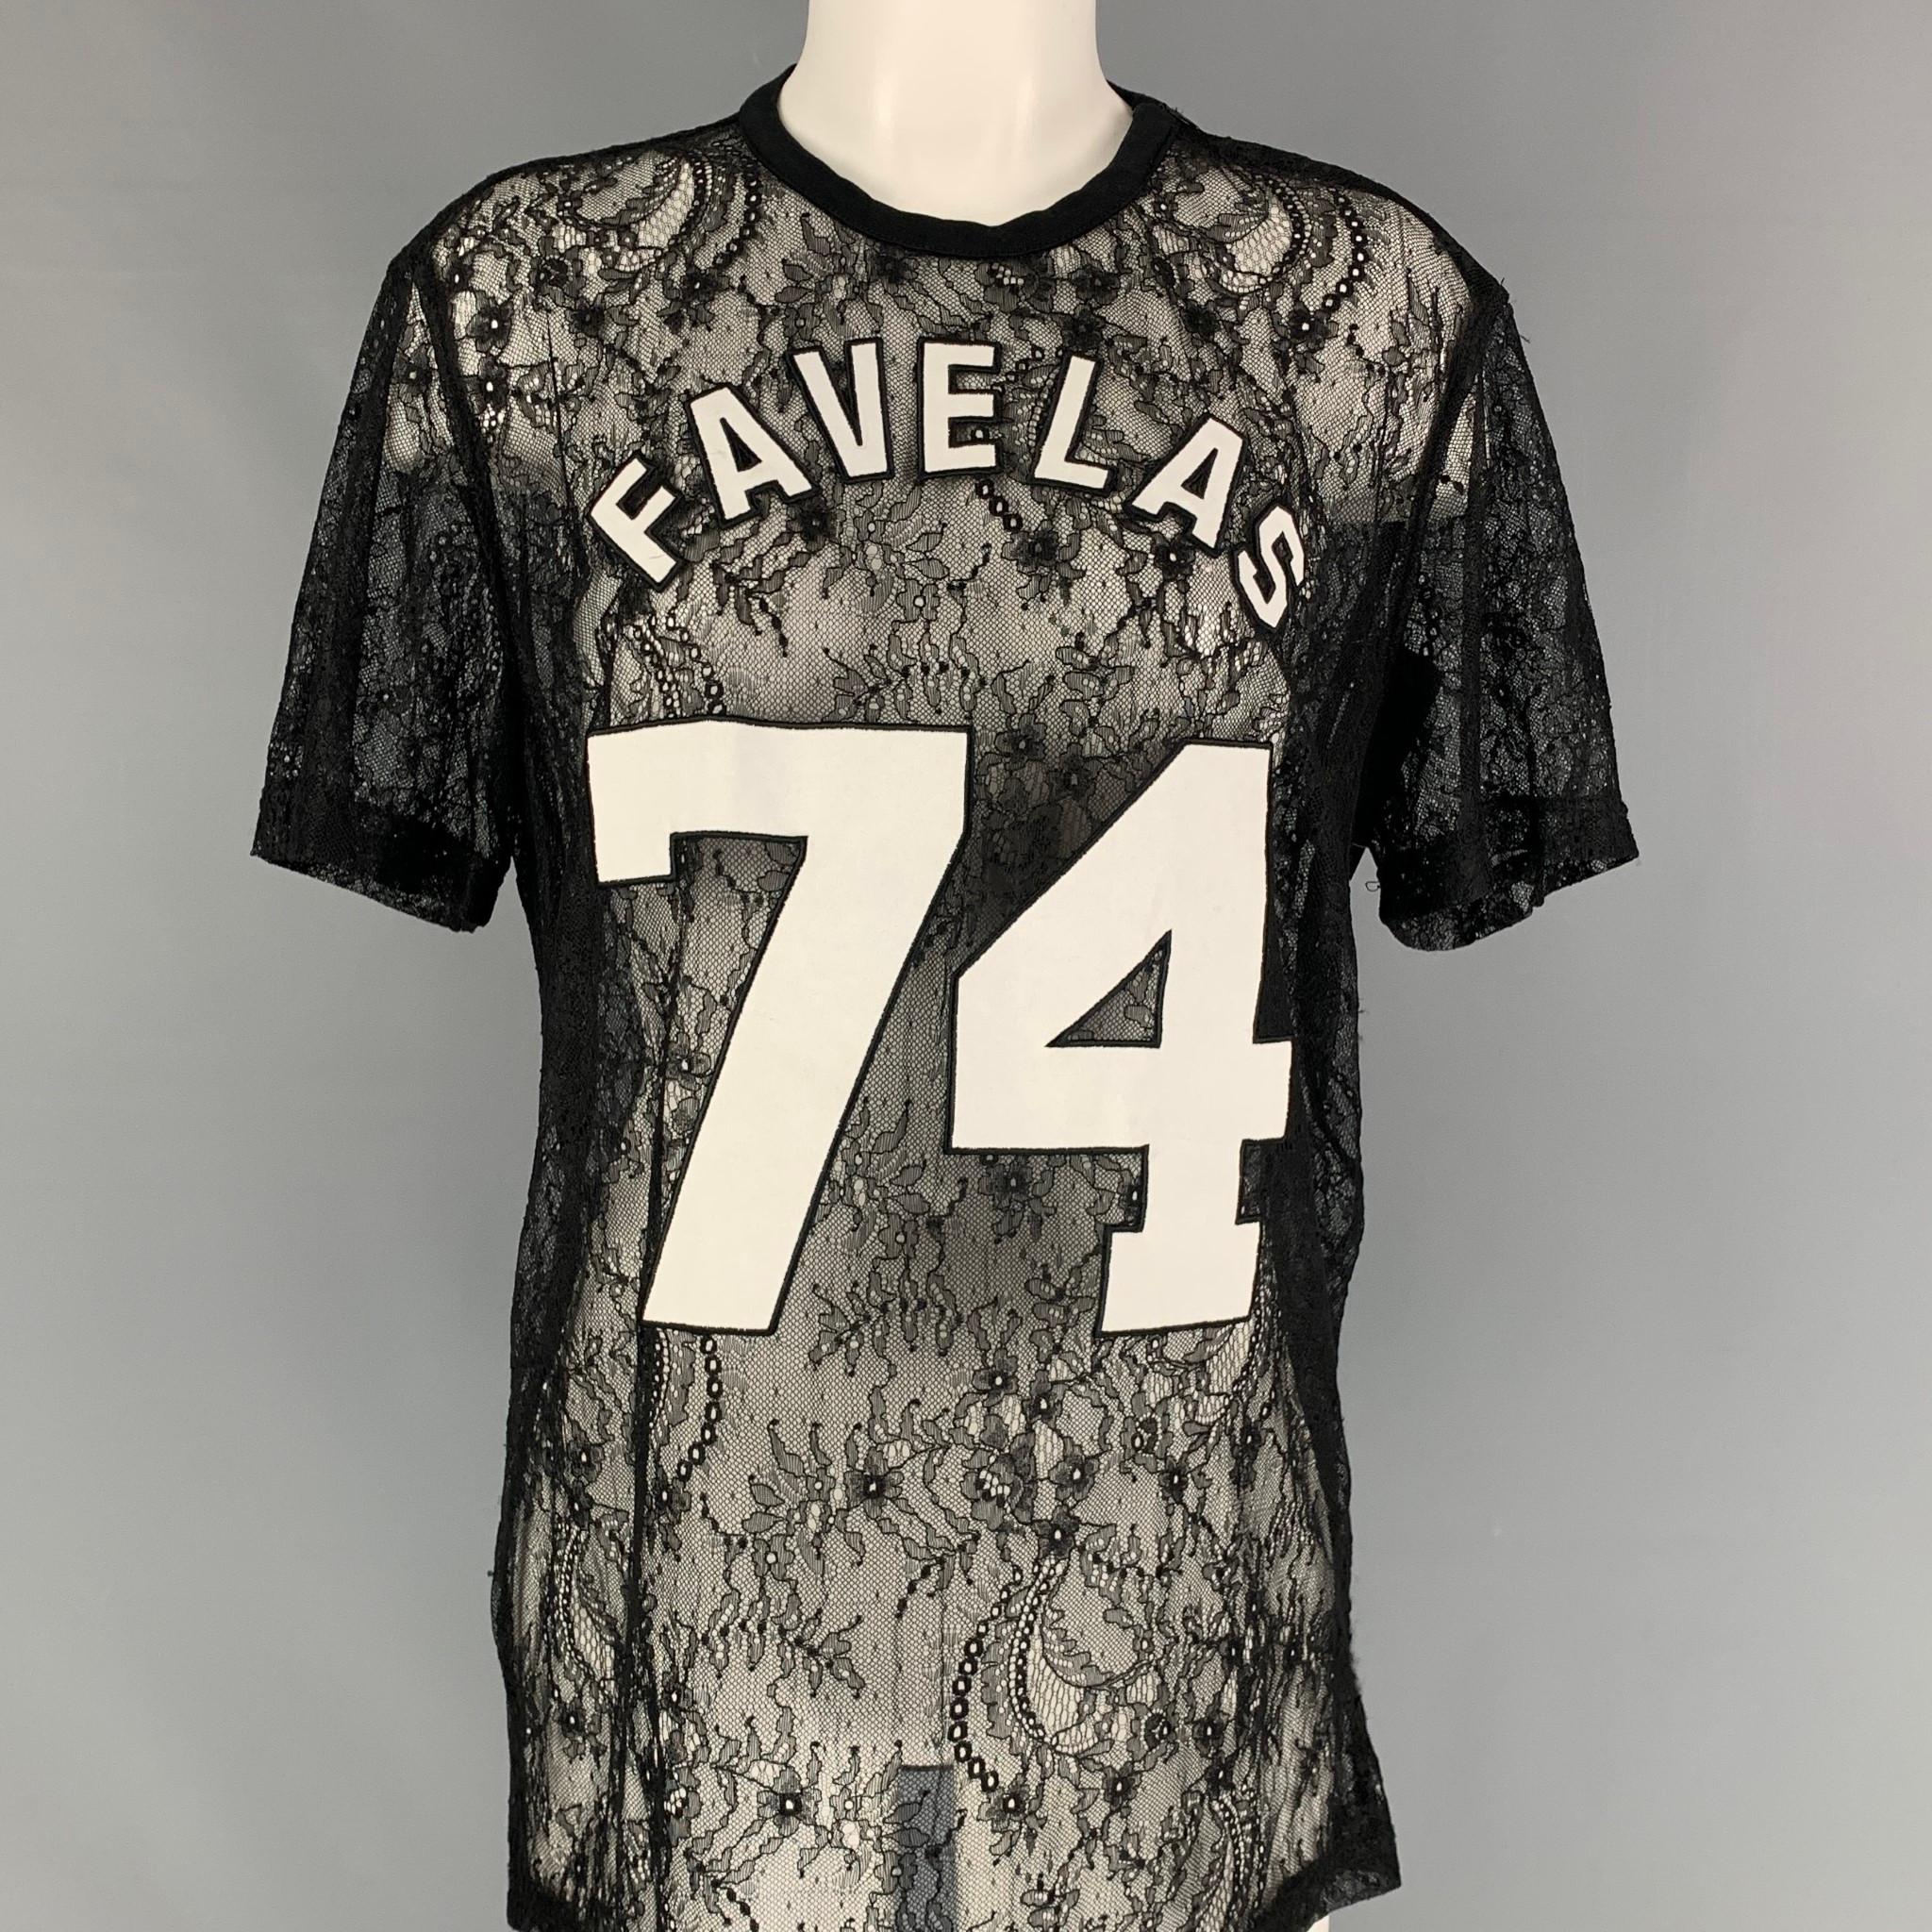 GIVENCHY Fall 2014 t-shirt comes in a black & white lace viscose / polyamide featuring a front 'Favelas 74' logo design, crew-neck, and a shoulder zipper closure. Made in Portugal. 

Excellent Pre-Owned Condition.
Marked: S

Measurements:

Shoulder: